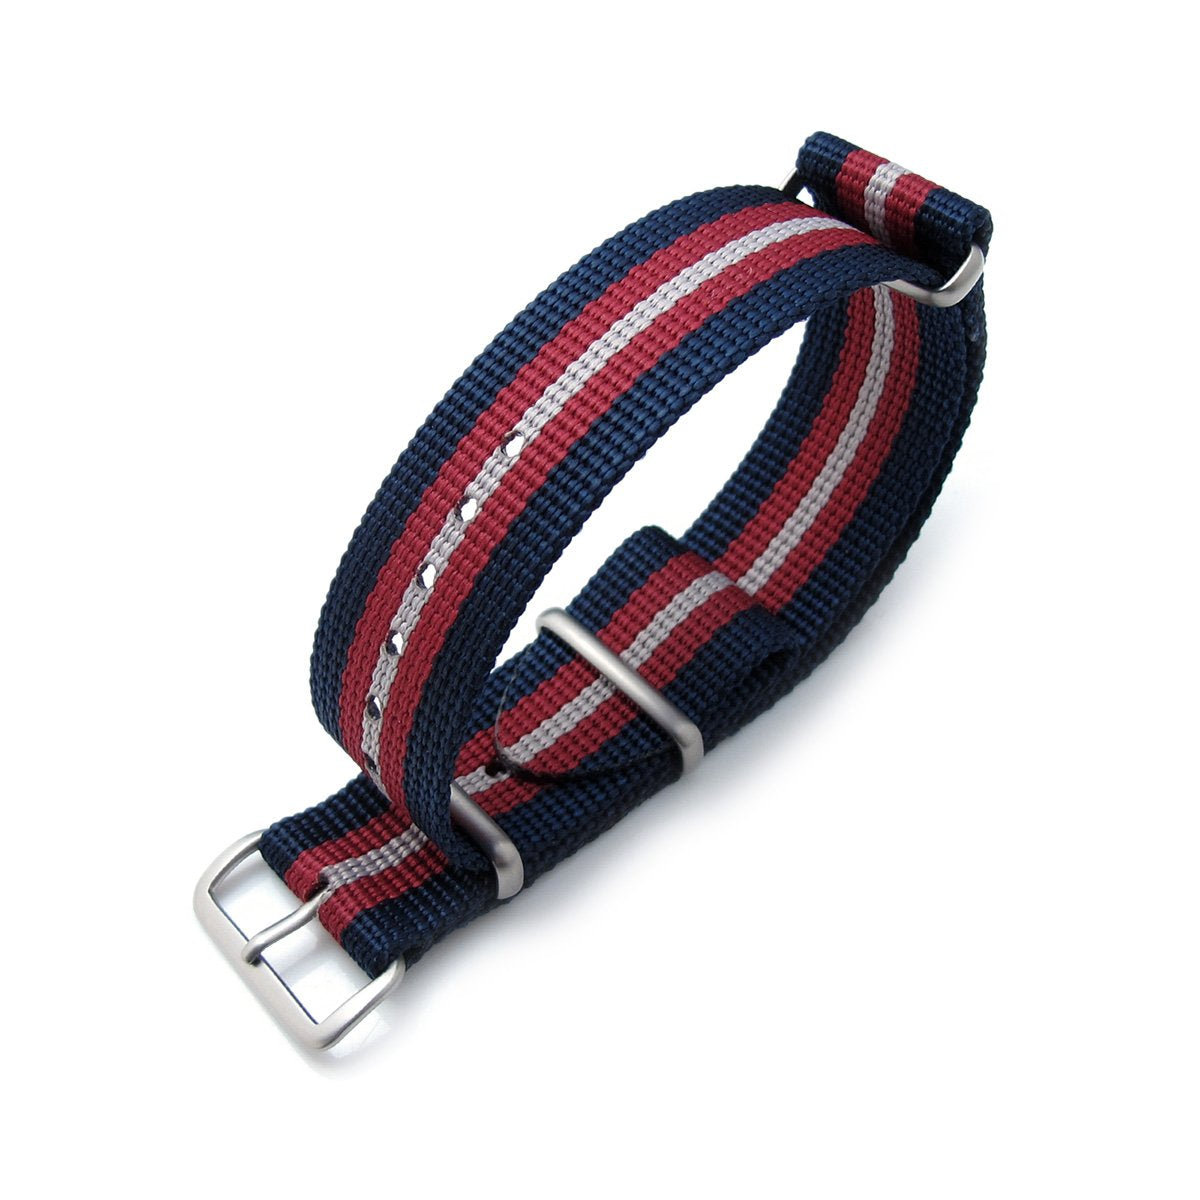 MiLTAT 20mm 21mm or 22mm G10 NATO Bullet Tail Watch Strap Ballistic Nylon Brushed Blue Red &amp; Grey Stripes Strapcode Watch Bands